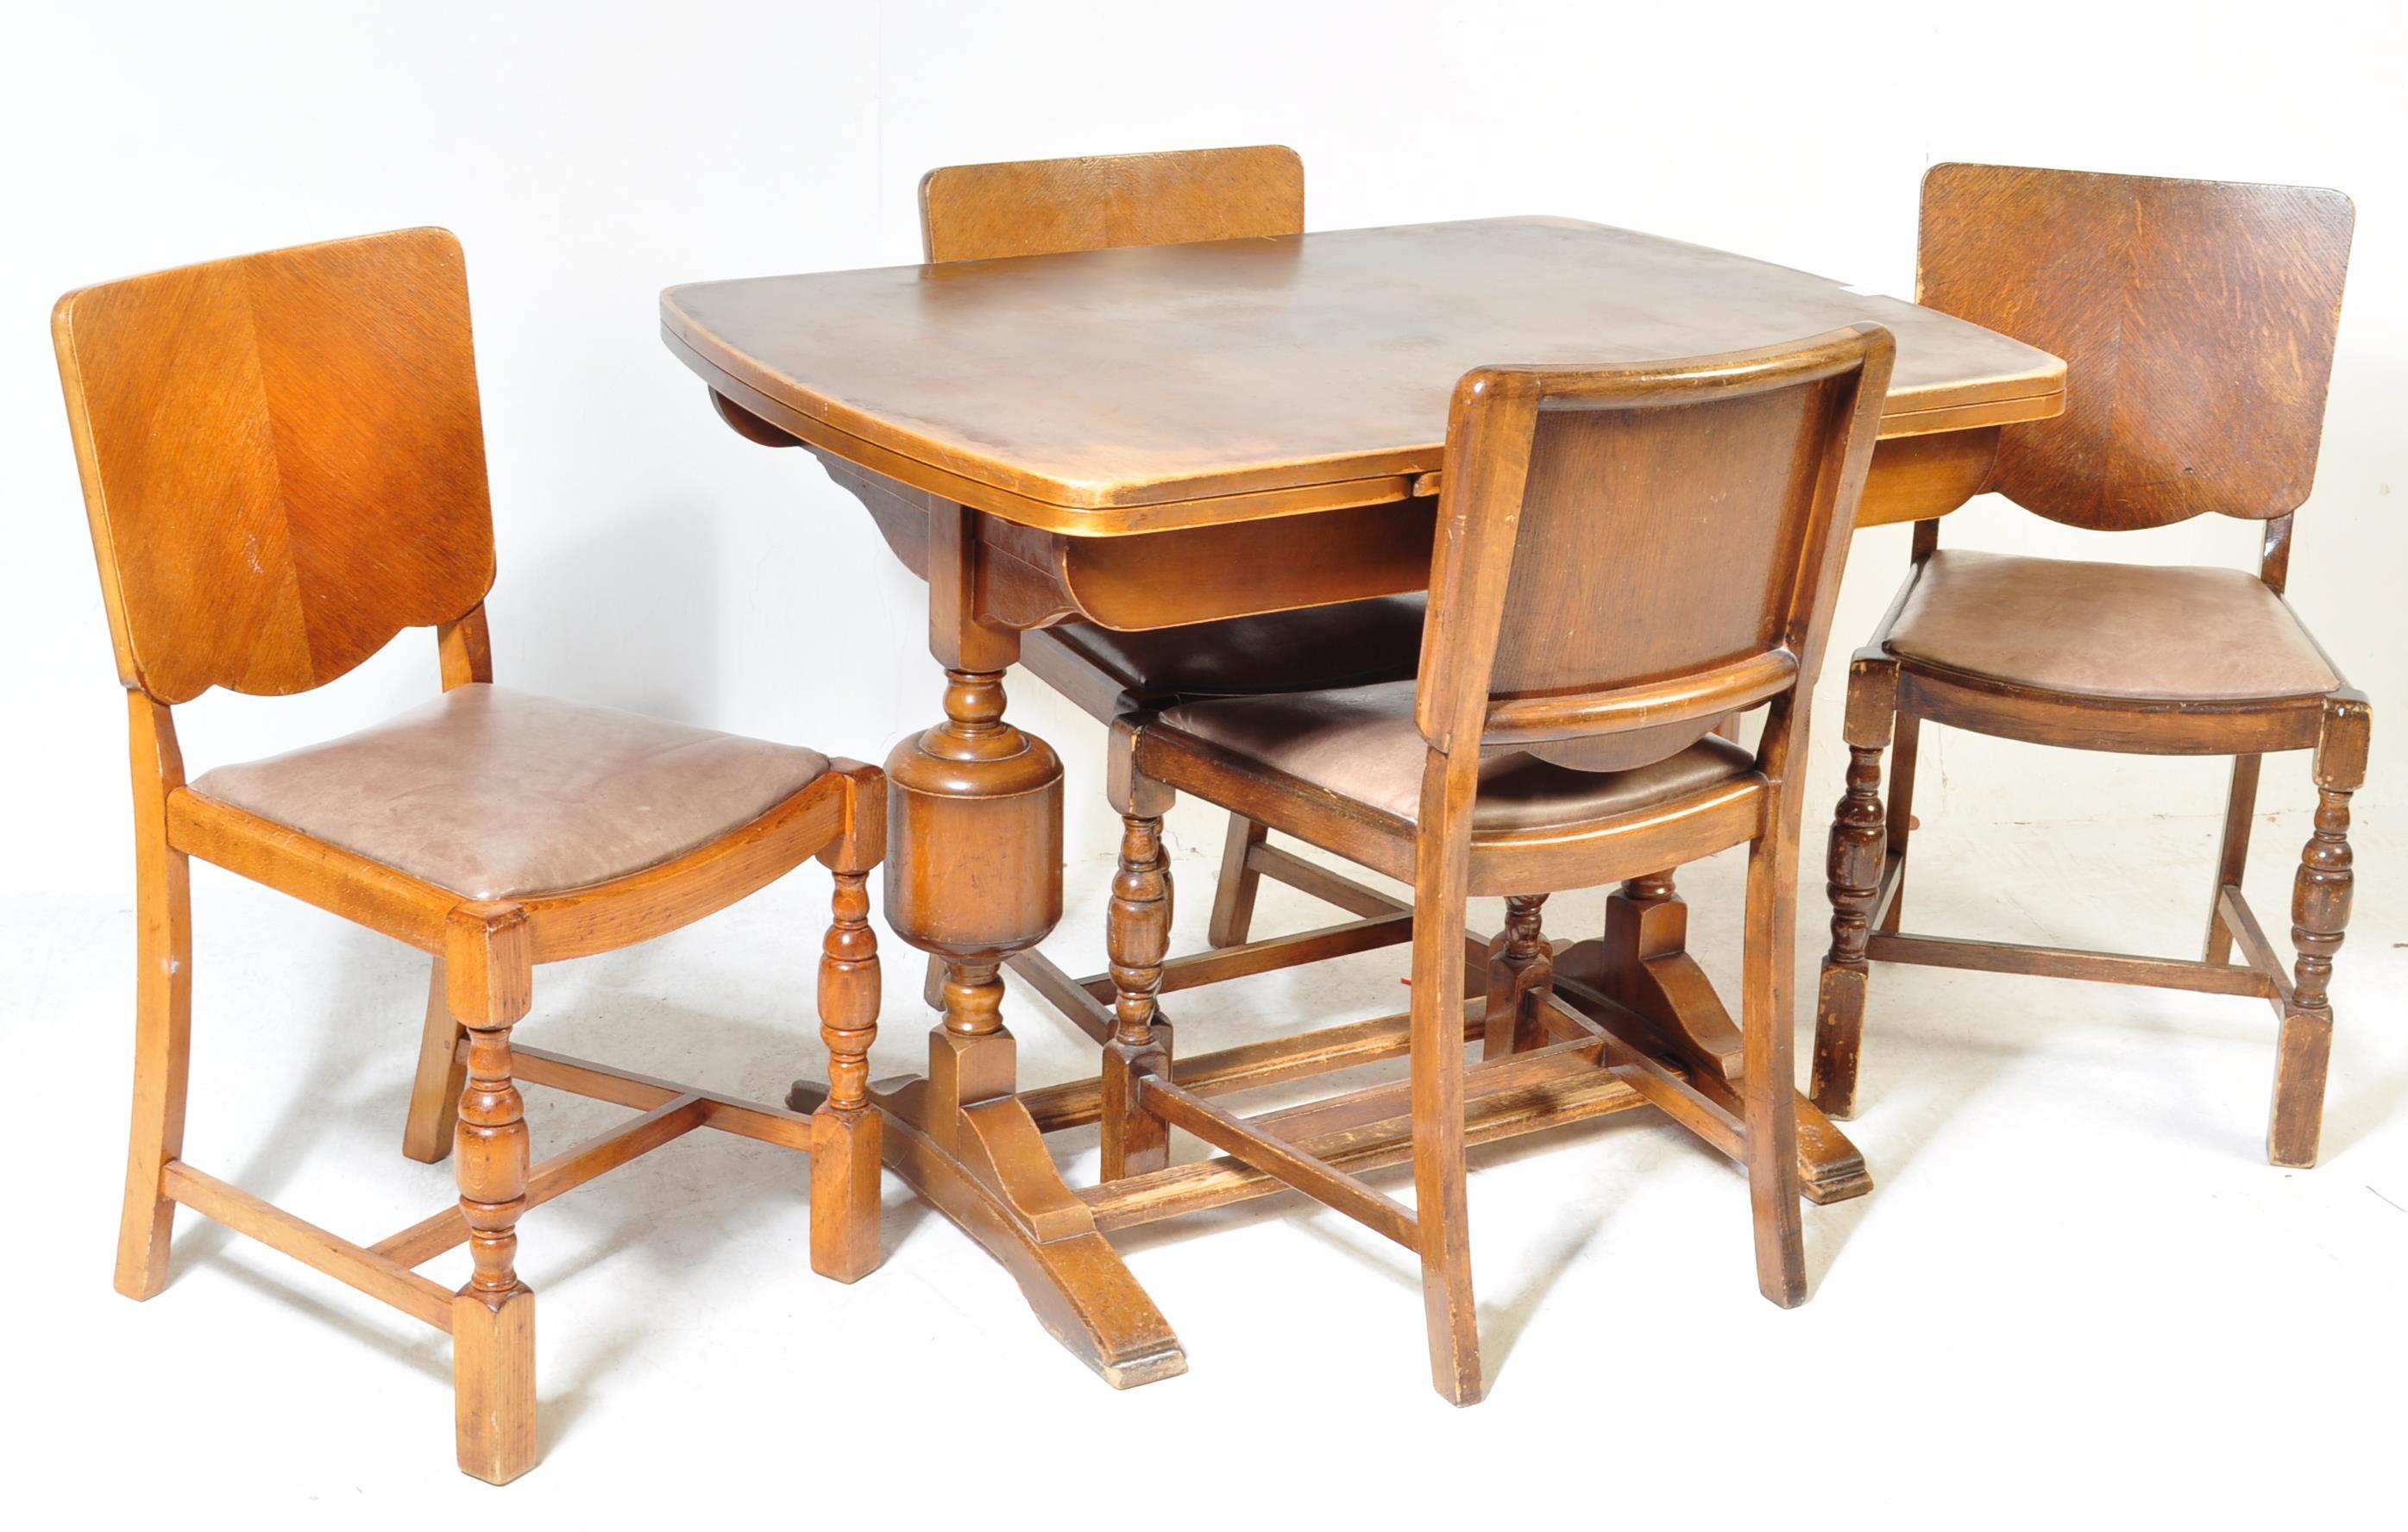 WALNUT & OAK 1940'S DRAW LEAF DINING TABLE & CHAIRS SUITE - Image 2 of 9